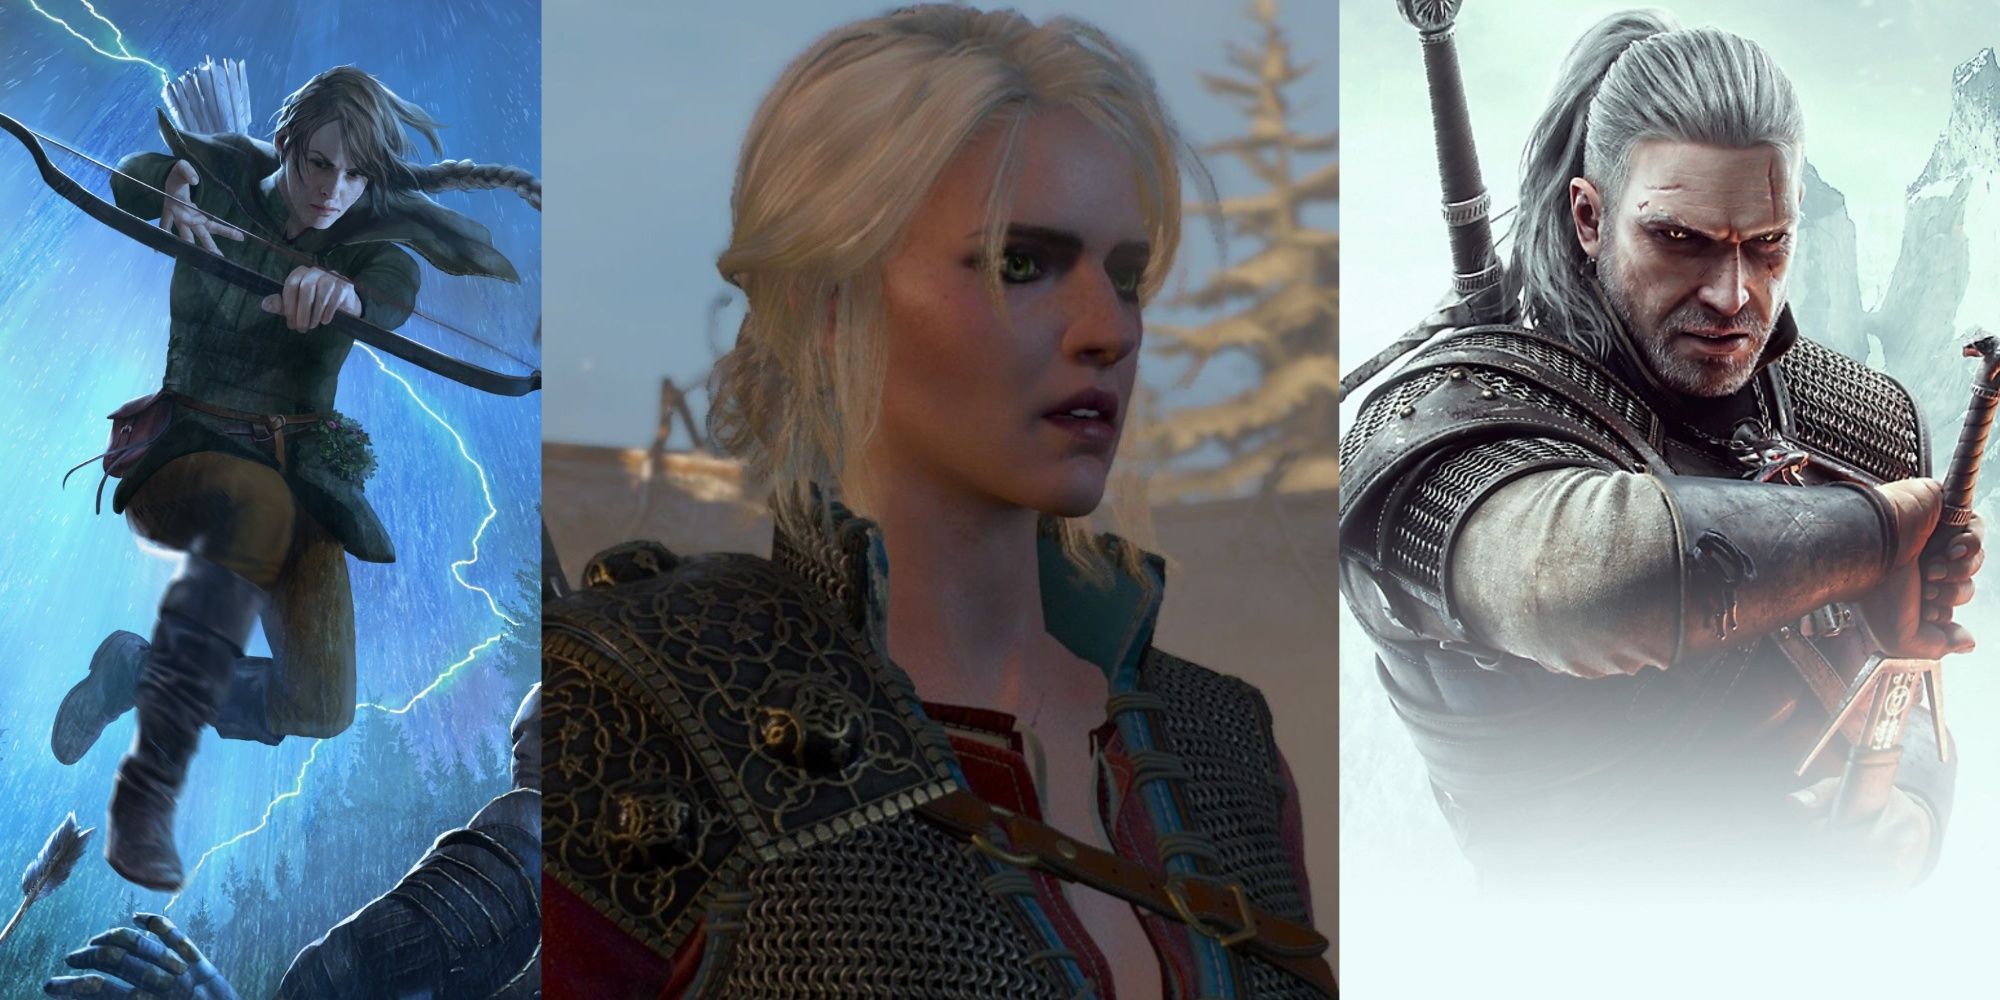 The Witcher - Milva, Ciri, and Geralt in various promotional art and Ciri in the Witcher 3